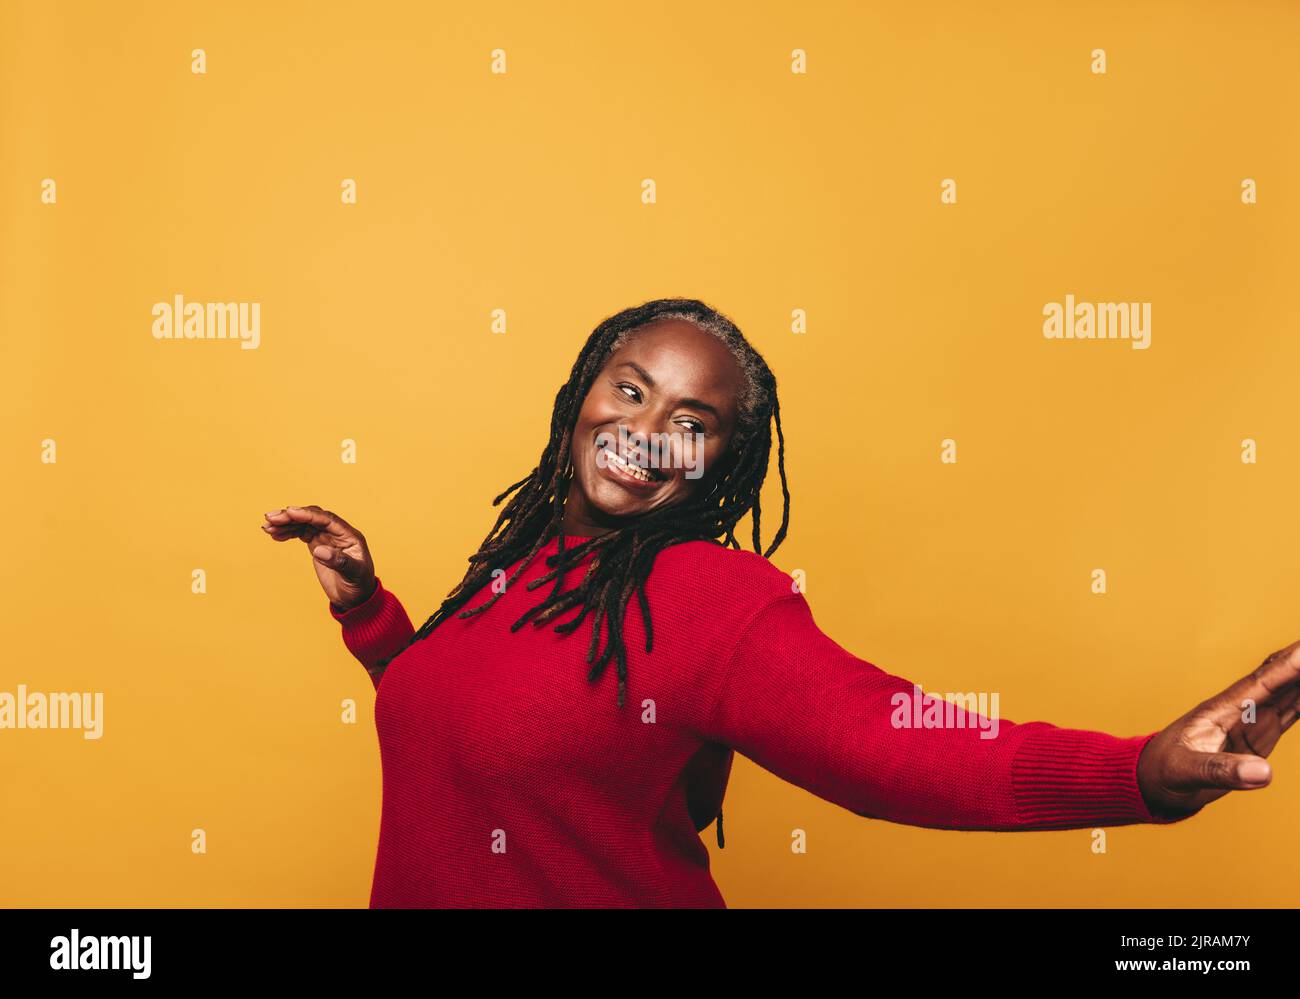 Cheerful mature woman dancing and having fun while standing against a yellow background. Happy black woman with dreadlocks embracing her natural hair Stock Photo